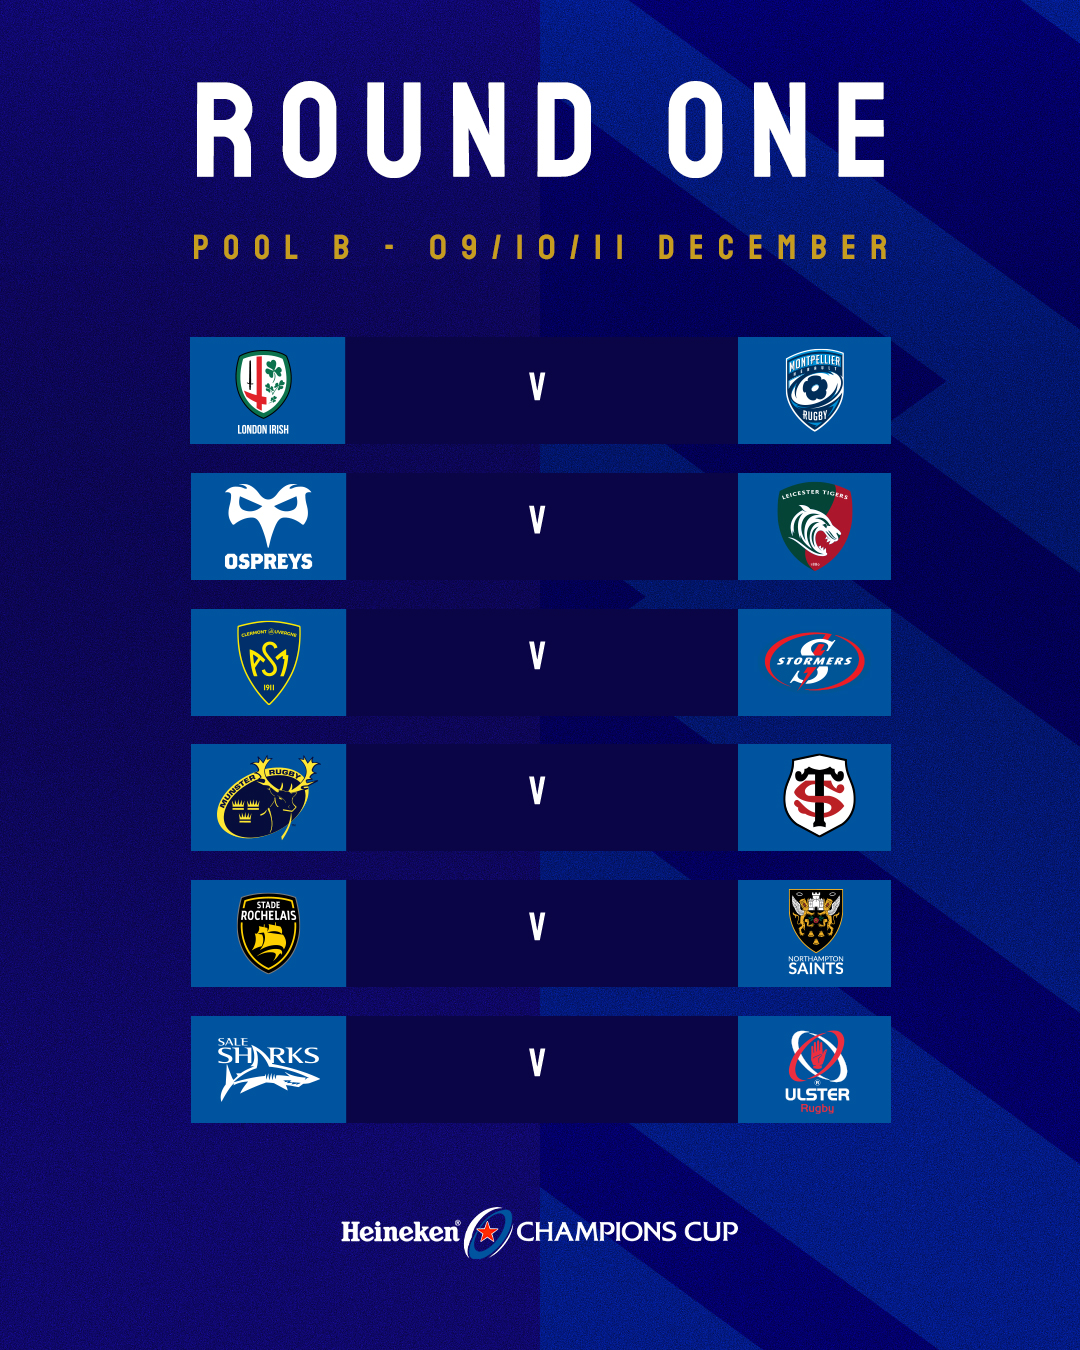 ødelagte mønster unse Heineken Champions Cup on Twitter: "#ICYMI… 🥁 The 2022/23  #HeinekenChampionsCup weekend schedule was revealed earlier today. What  games have you already circled on your calendar? 📅  https://t.co/DLtslvCxvd" / Twitter